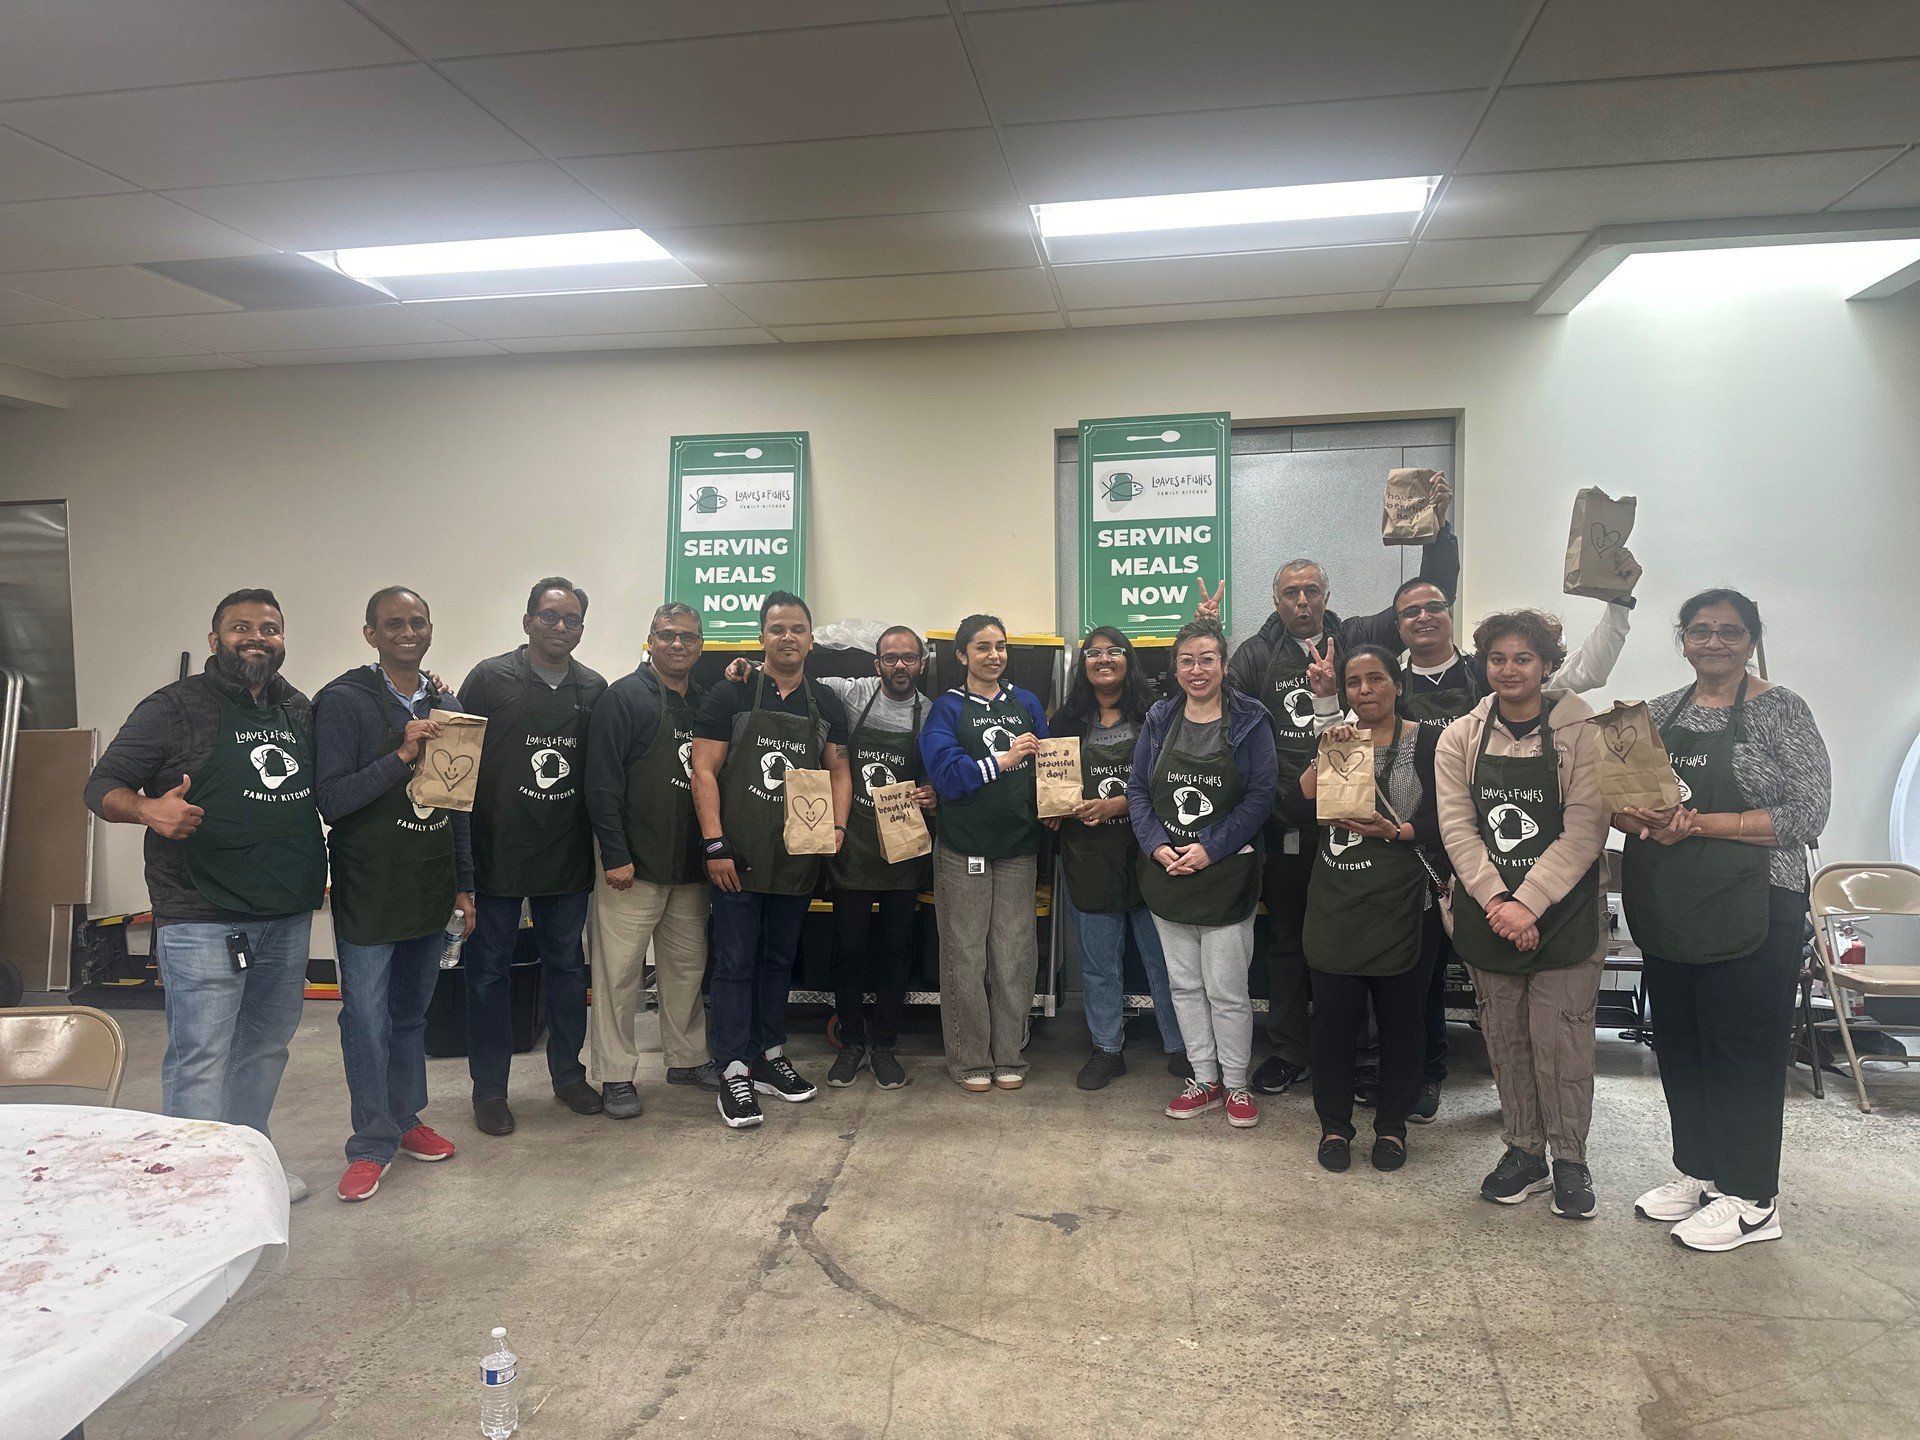 #happyfriday! What an incredible group from @cisco! Thanks to everyone who volunteered and assembled 500 brown bag lunches. These will be in the hands of anyone facing food insecurity within 48 hours! 
Sign up to volunteer here: https://www.loavesfis